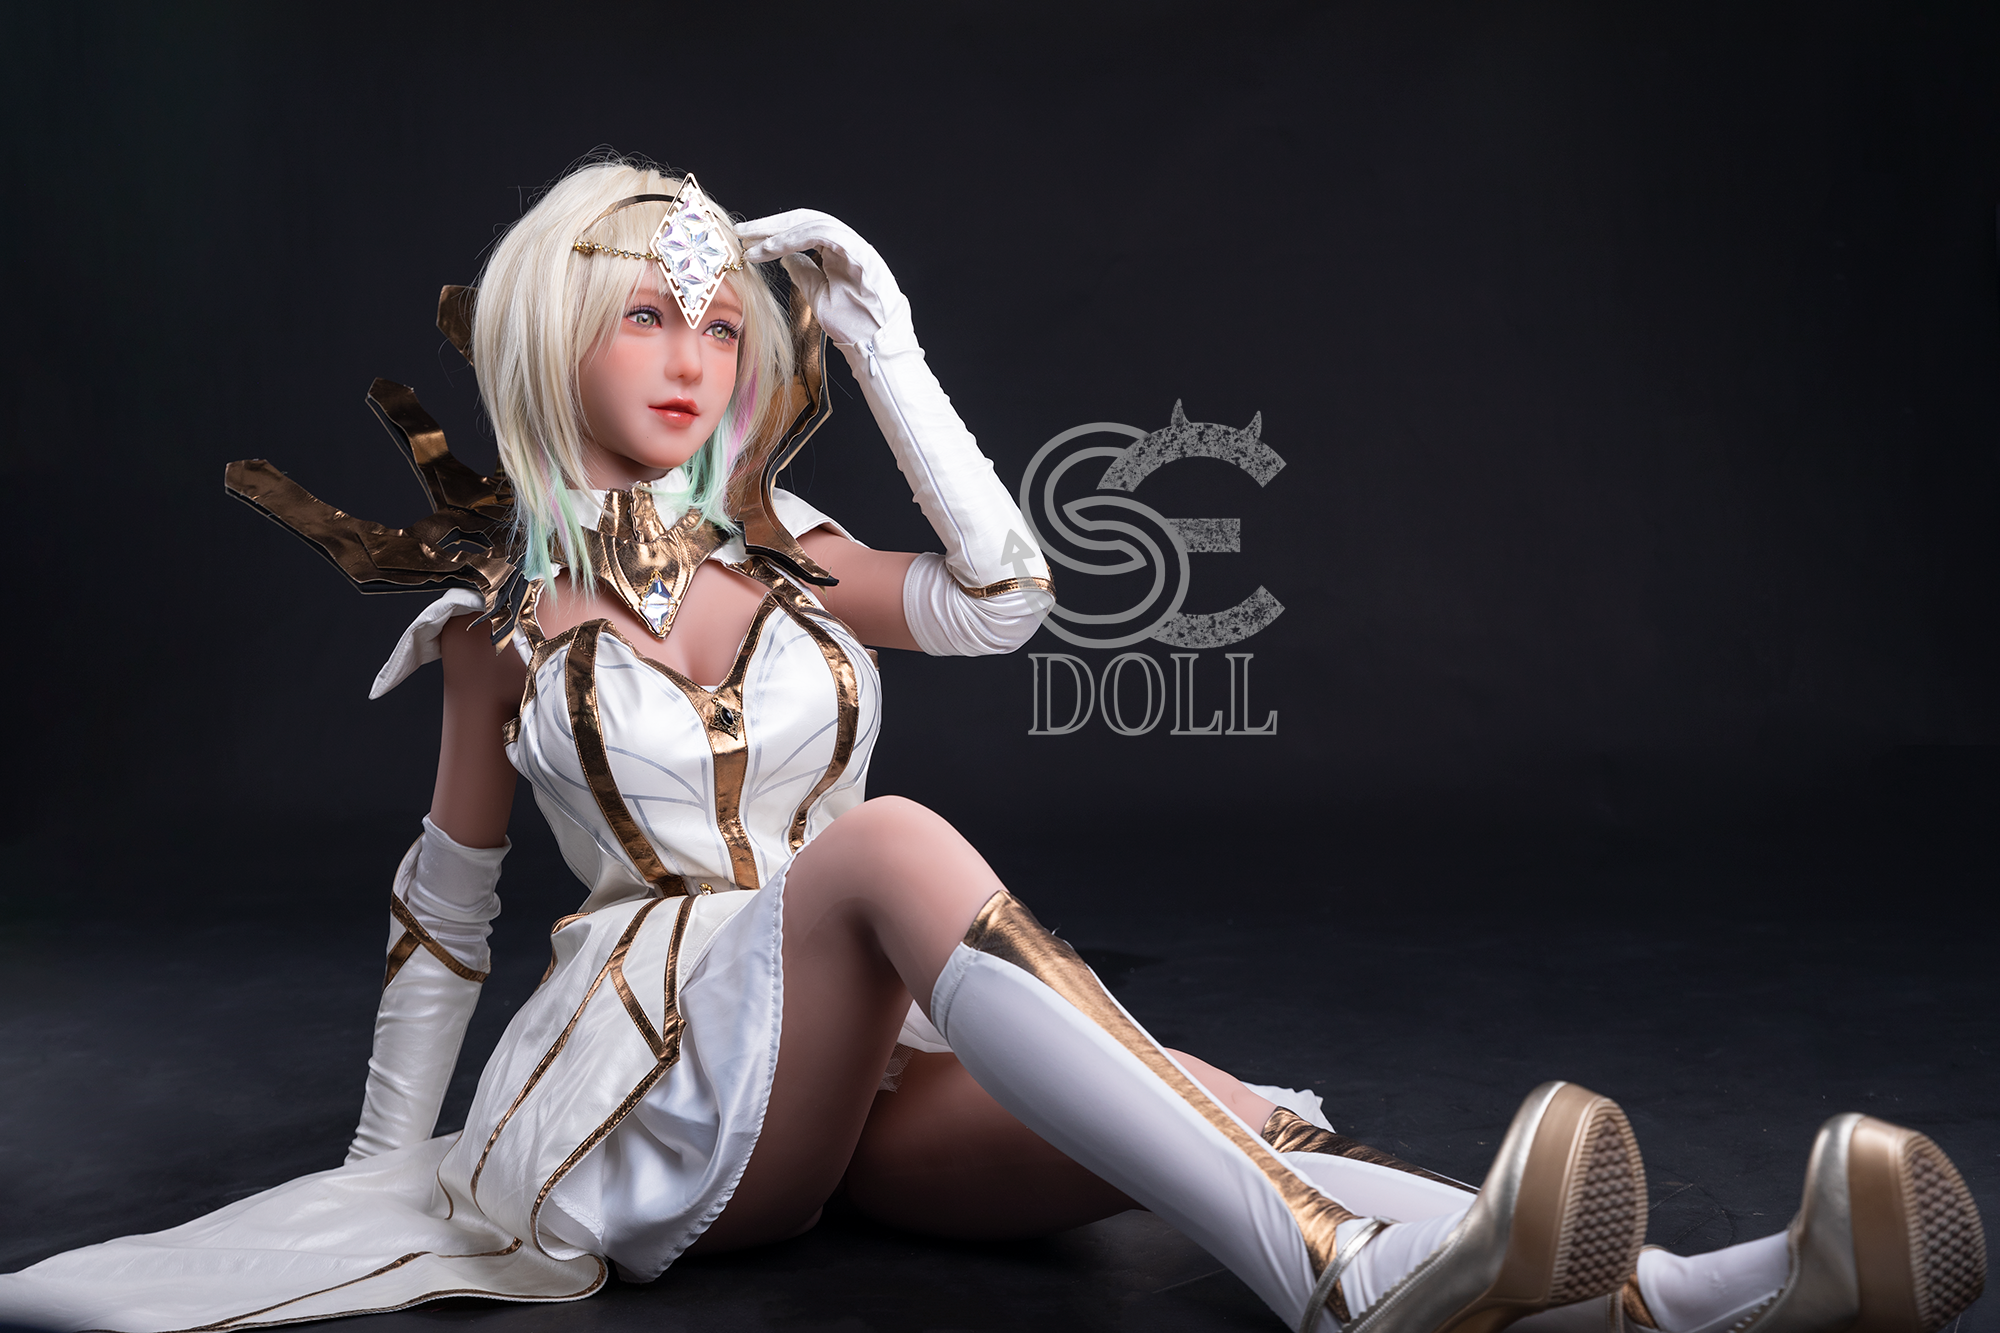 SEDOLL 161 cm F TPE - Angie | Buy Sex Dolls at DOLLS ACTUALLY